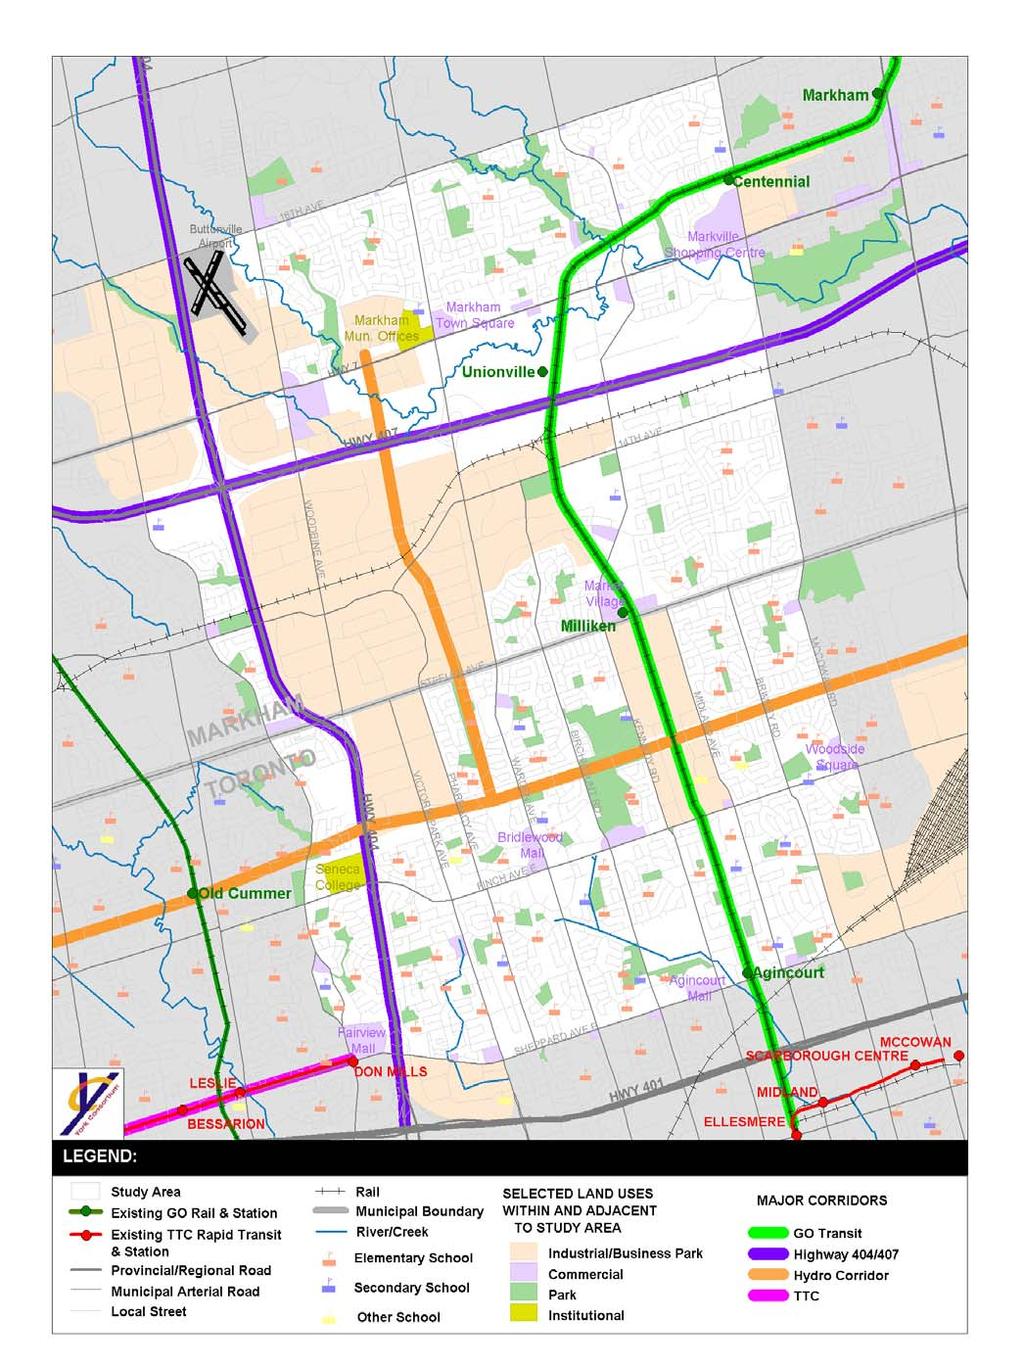 2 2.2 OVERVIEW OF EXISTING CONDITIONS IN STUDY AREA 2.2.1 The Built Environment The initial study area for the Markham North-South Link corridor is quite large and contains a wide variety of land uses and development patterns as shown on Figure 2-2.